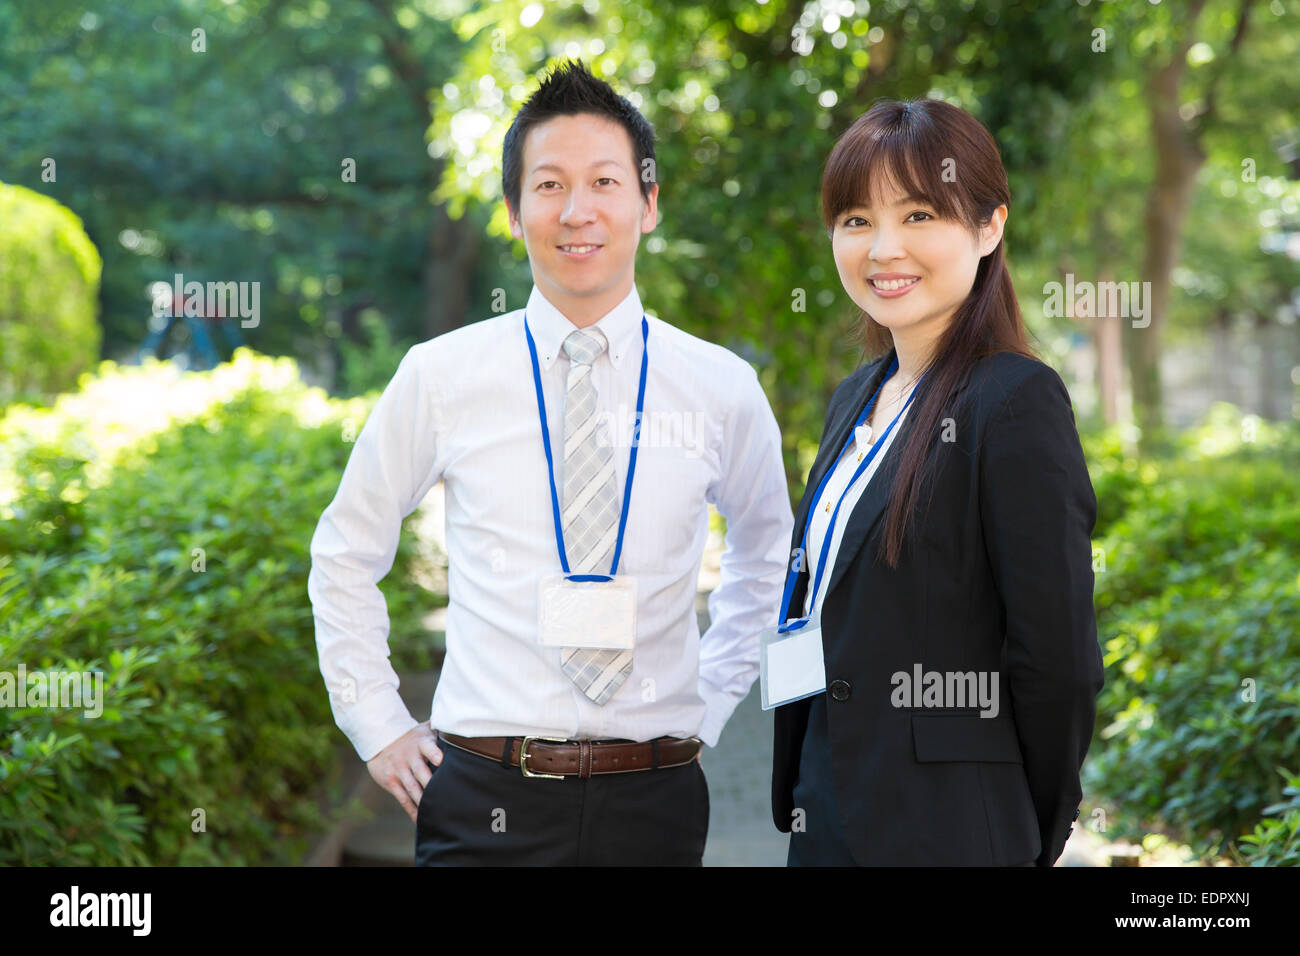 Smiling Business People Looking at Camera Stock Photo